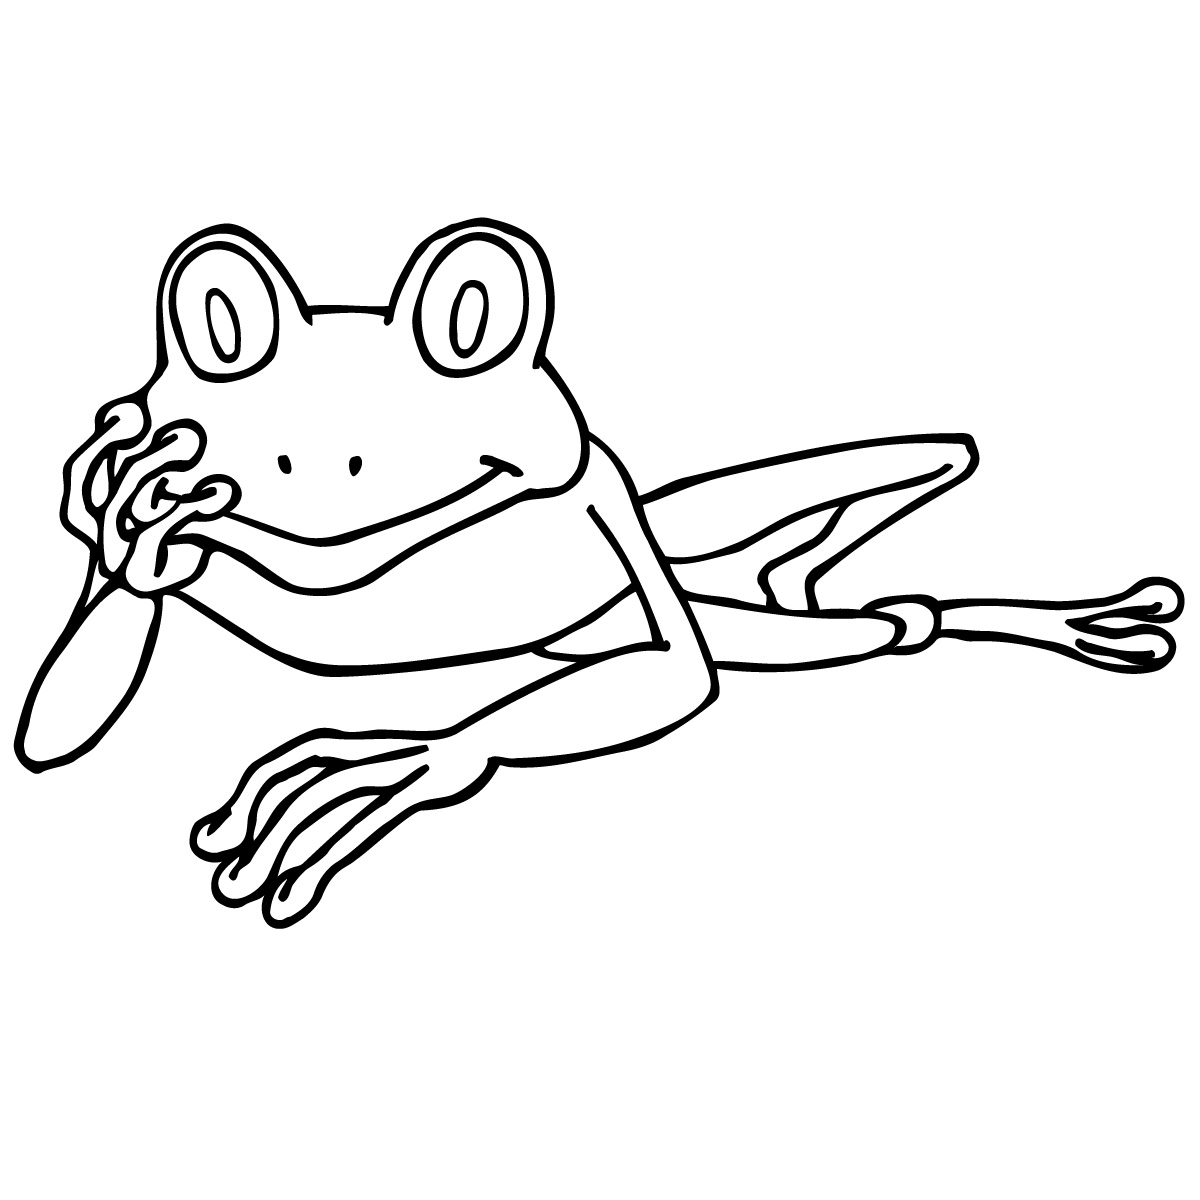 Printable Cute Frog Coloring Page 1230